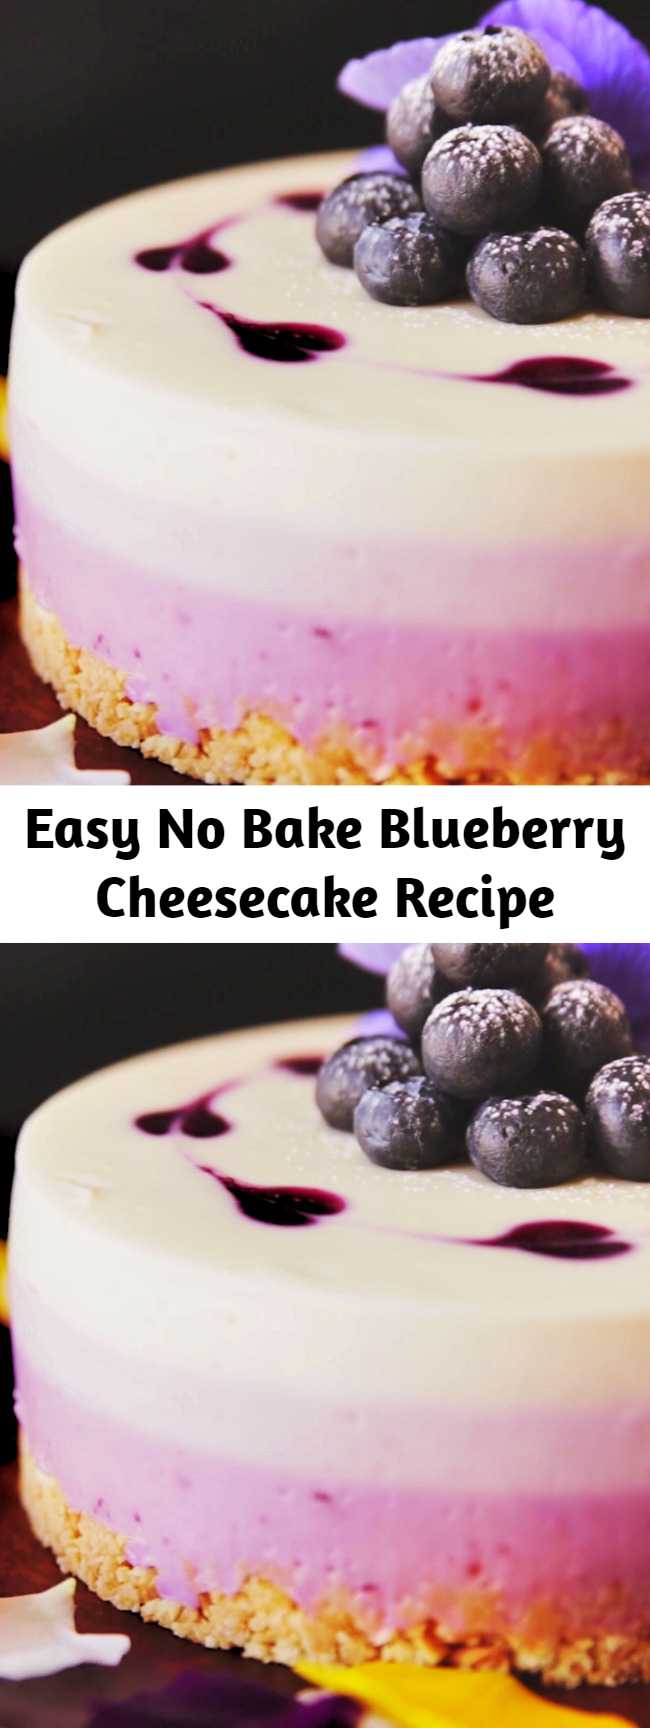 Easy No Bake Blueberry Cheesecake Recipe - Rich, velvety cheesecake combined with plump, ultra sweet blueberries makes for one of the most delectable desserts you'll ever eat. The best part? This beauty is no bake!